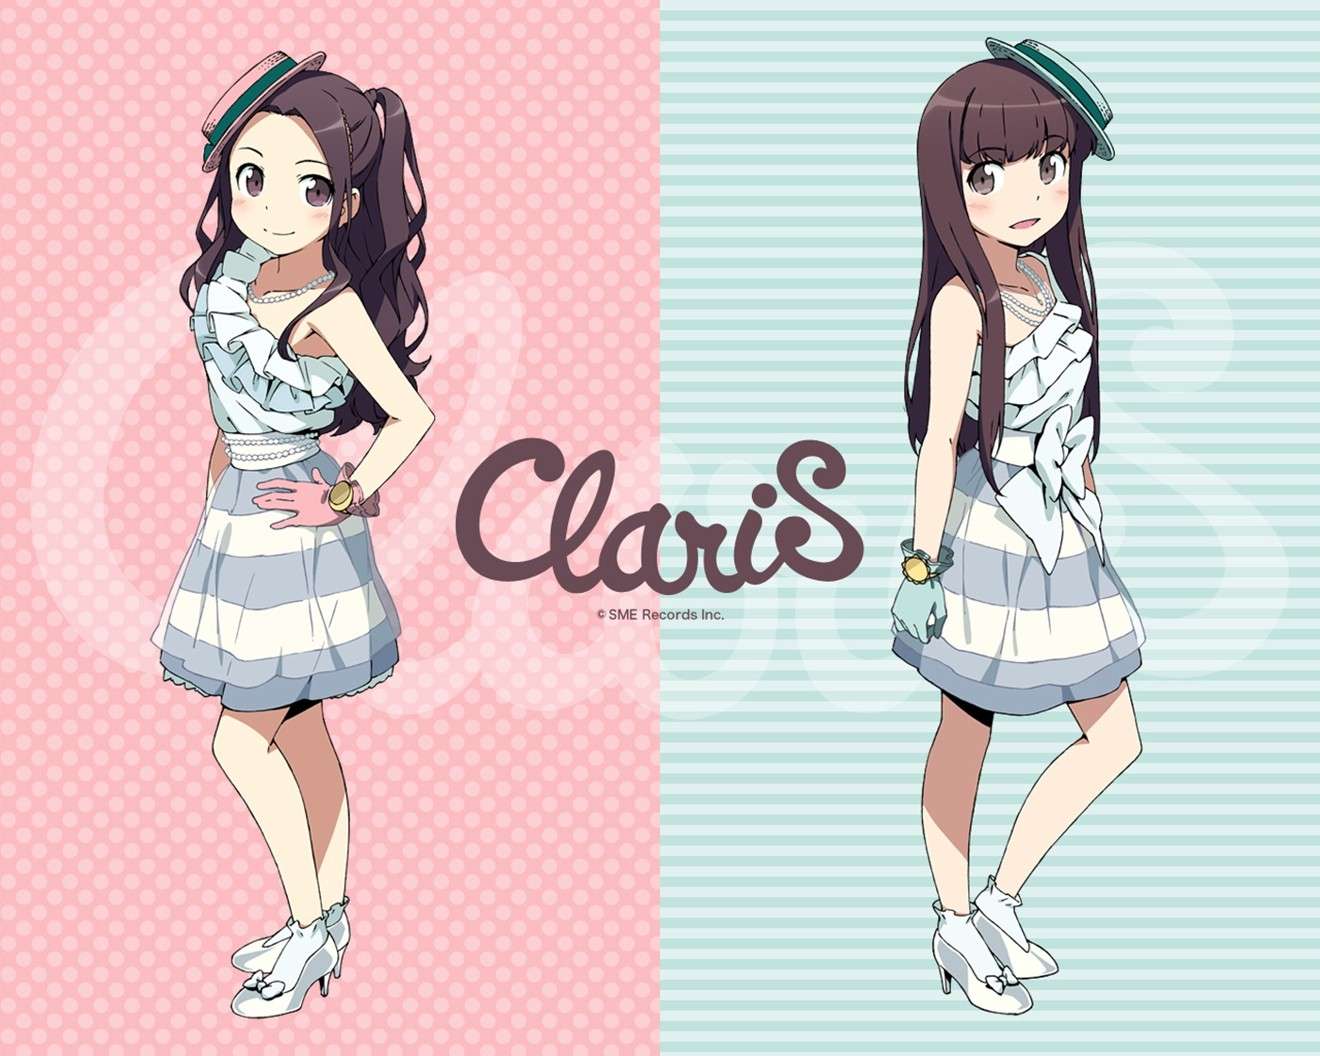 Favorite Anime Band and Singer! Claris10